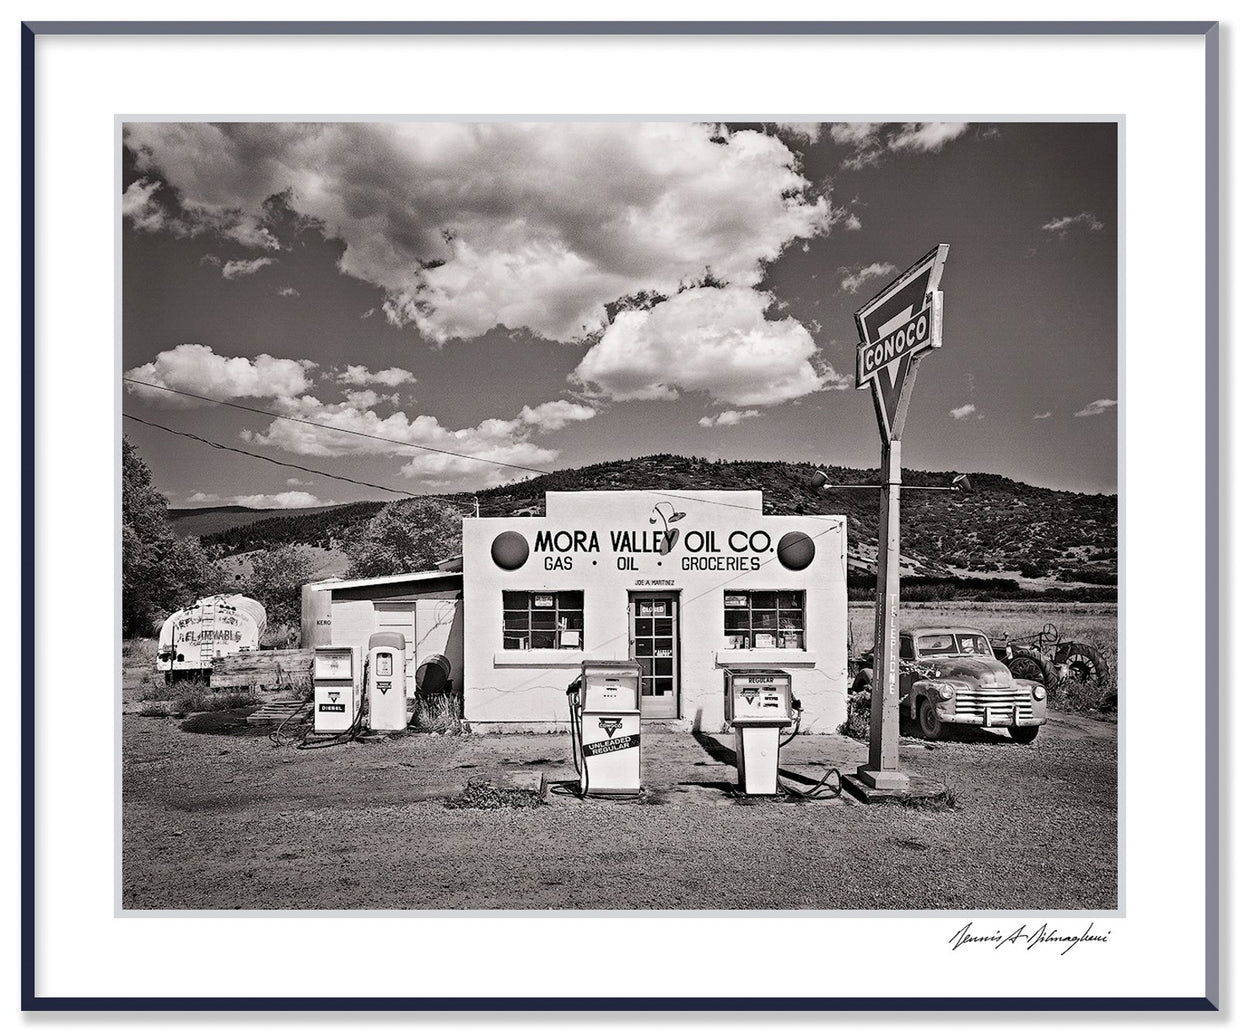 Dilmaghani Black and White Photograph, Mora Valley Oil Company, NM